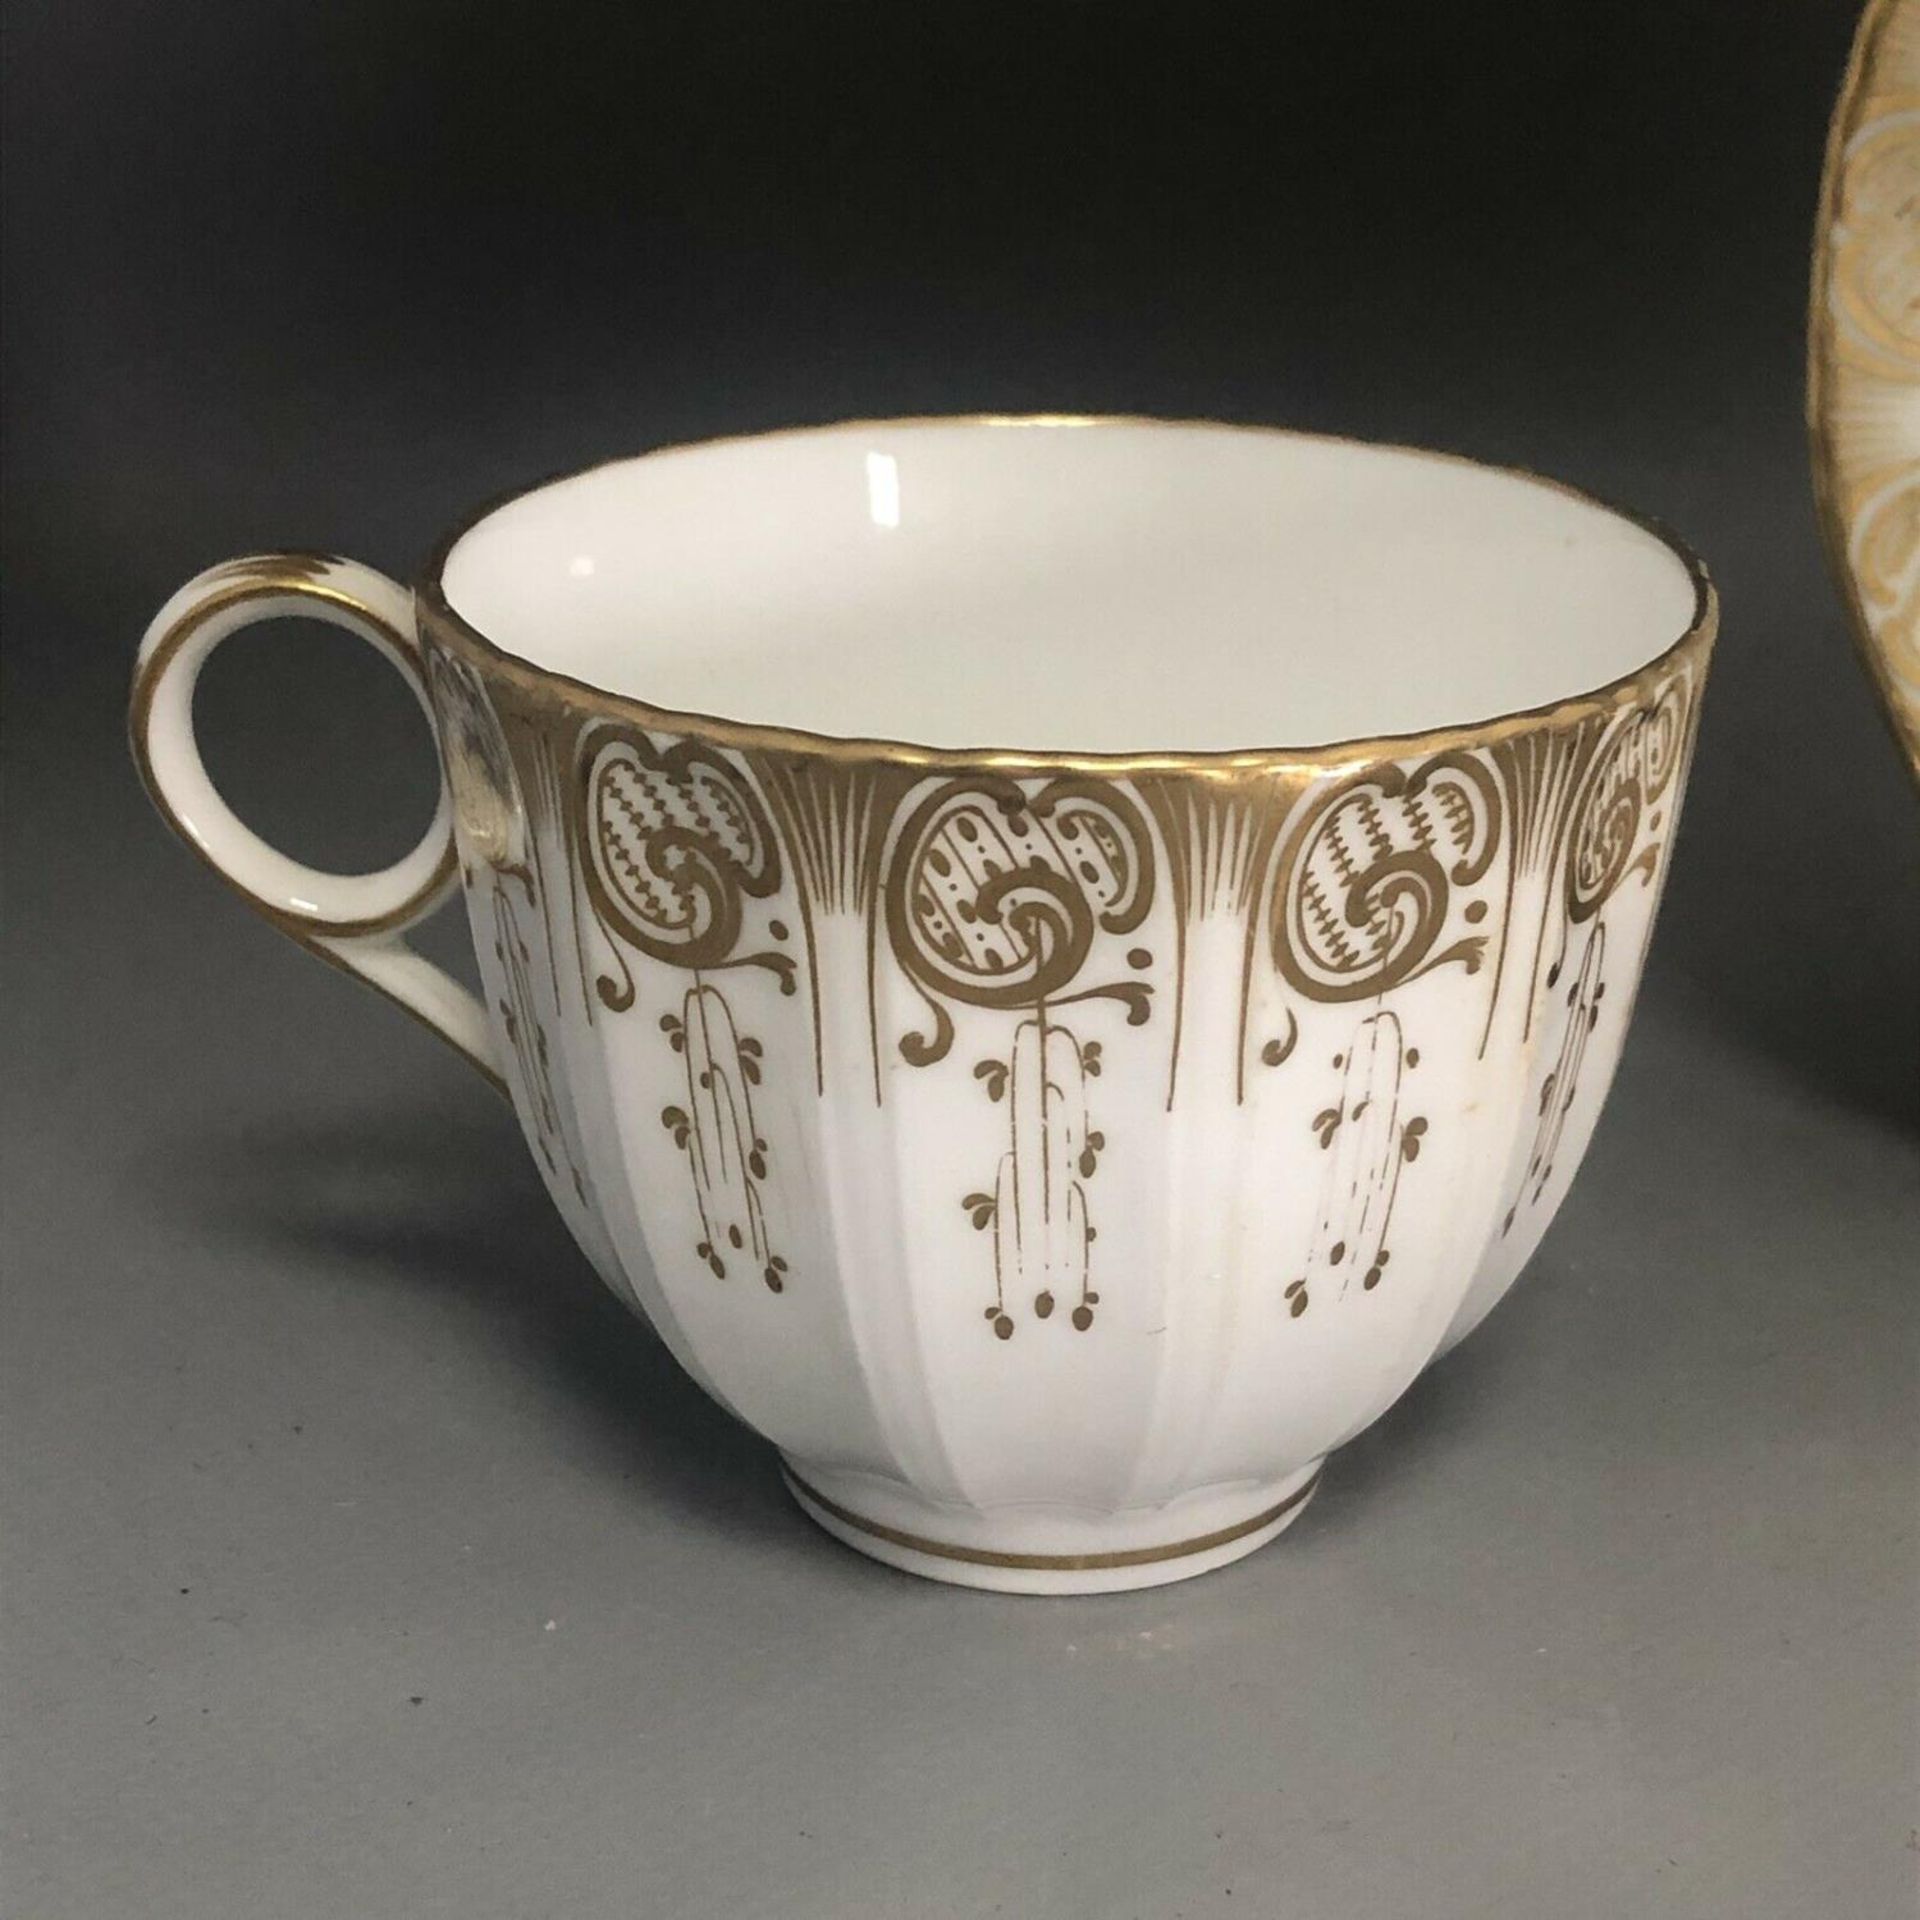 c1880, A Davenport Porcelain Group - Coffee Can, Tea Cup & Saucer - Image 4 of 6